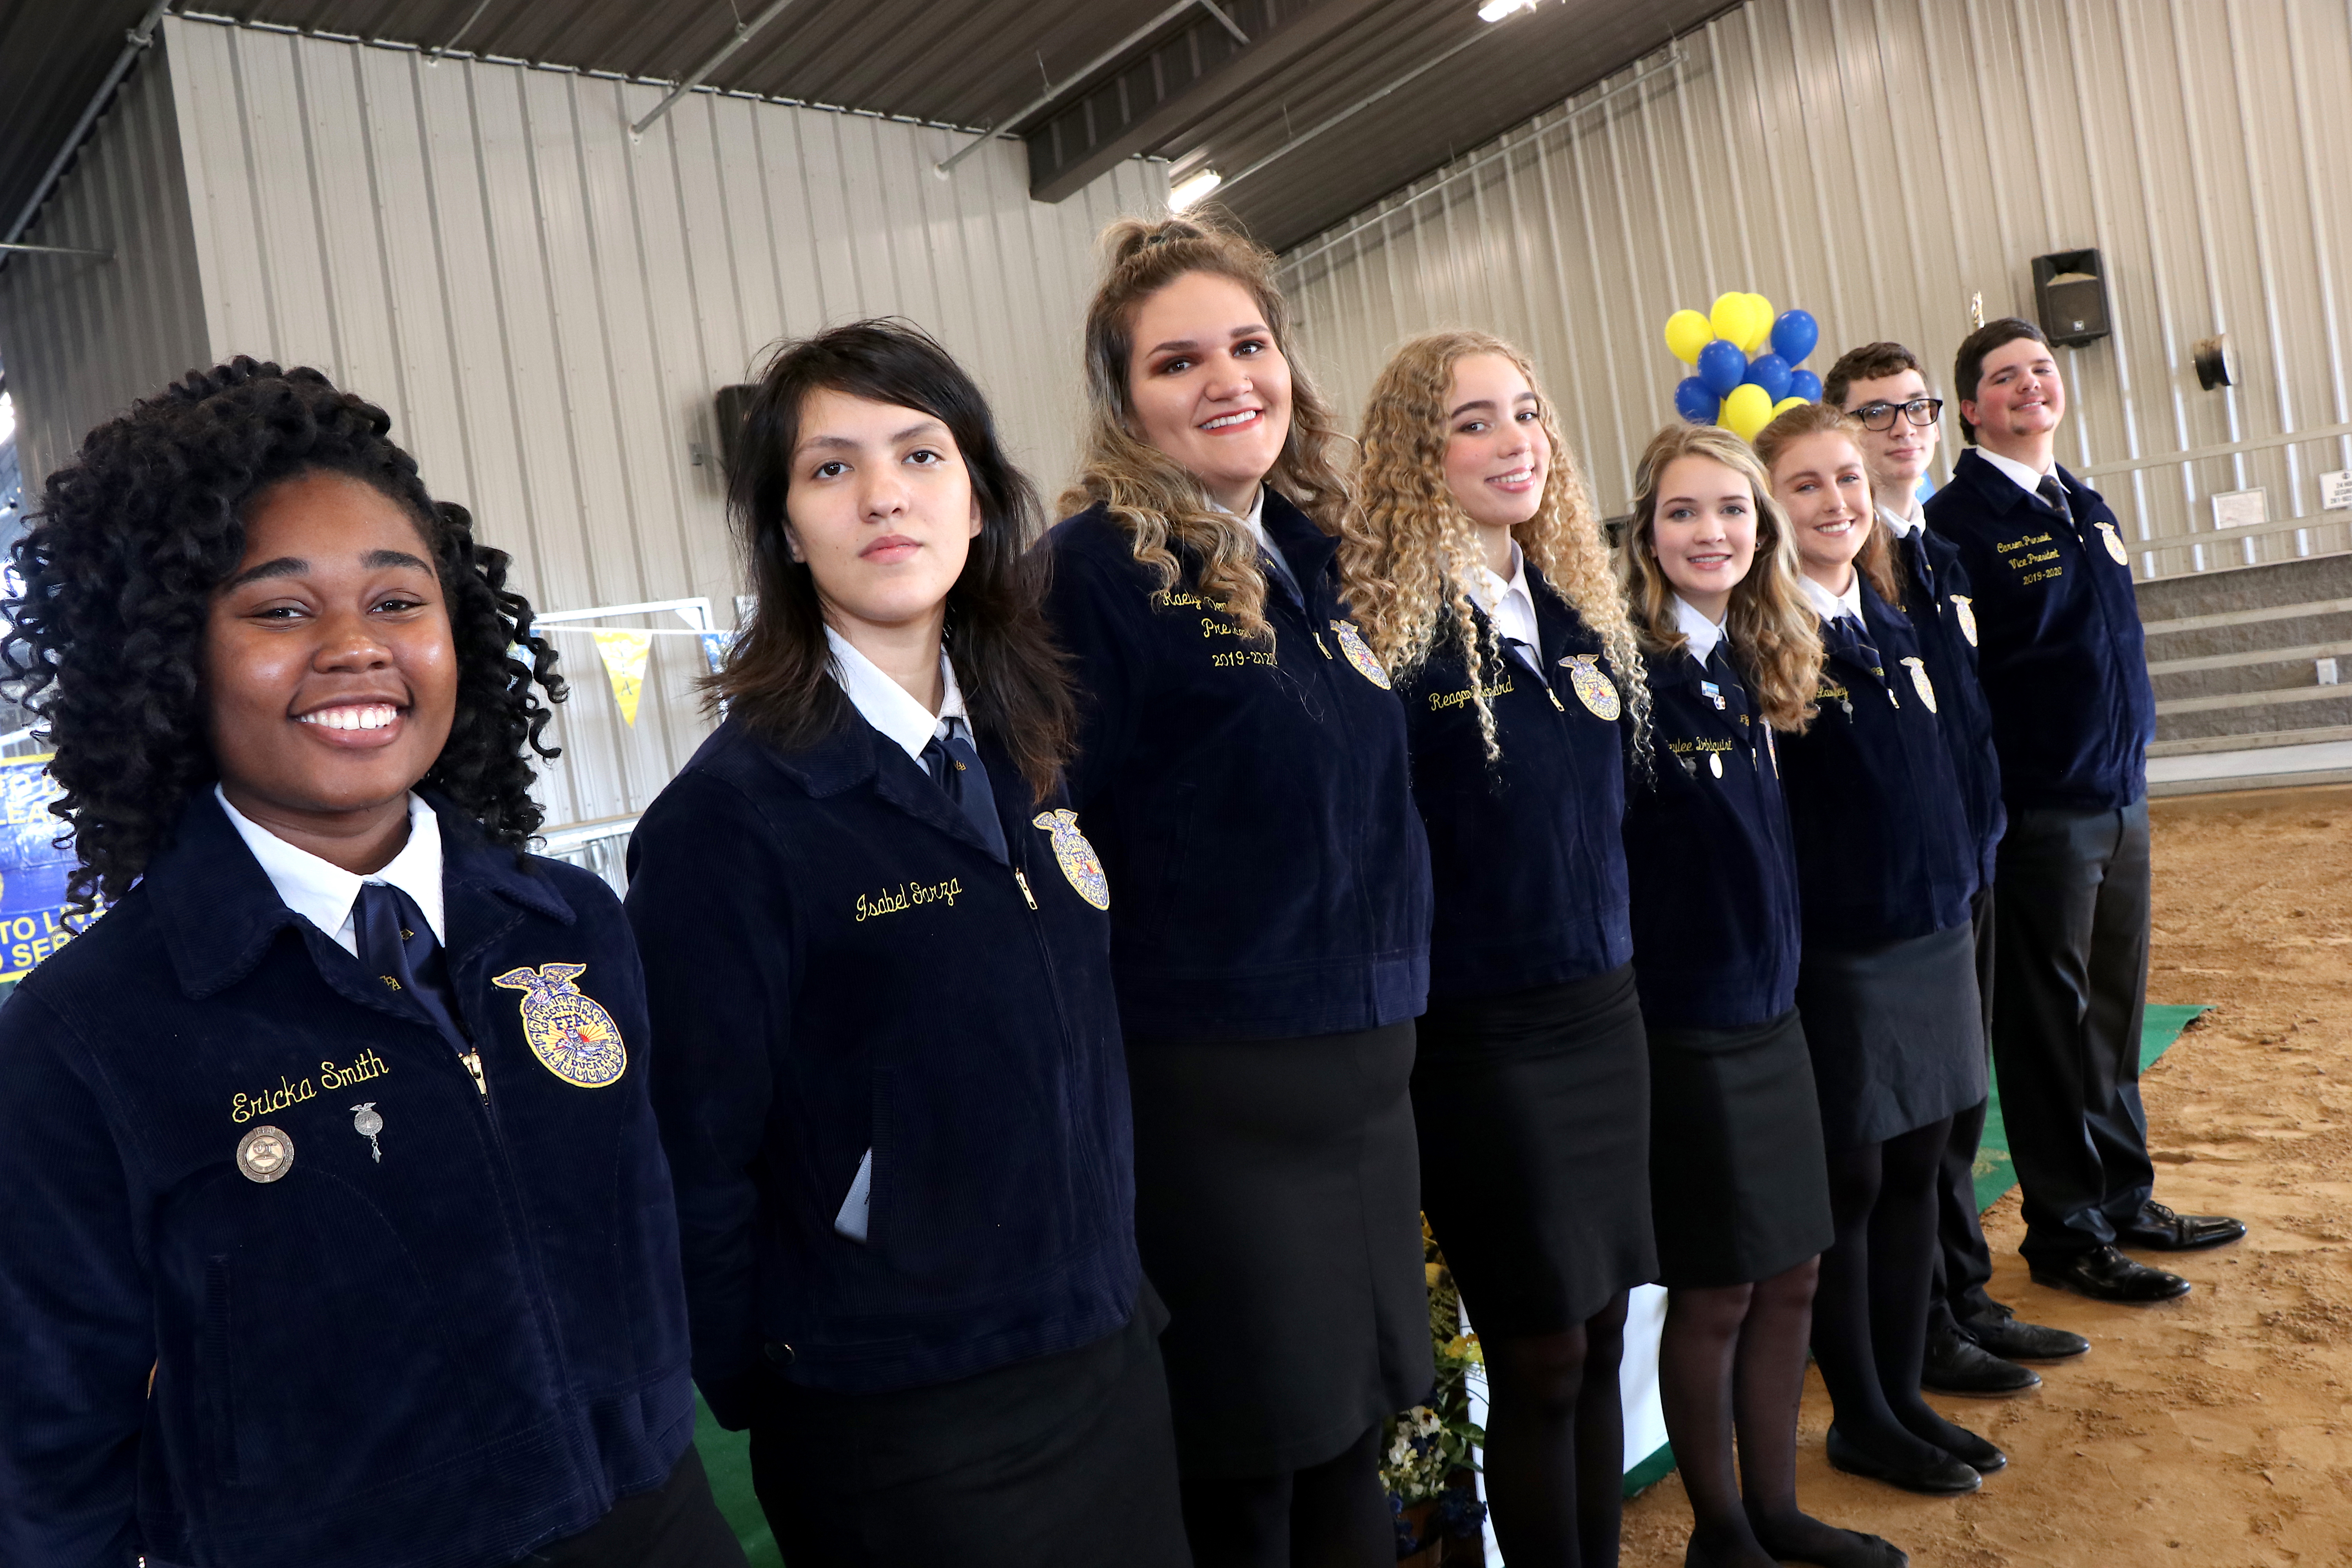 FFA students lead the opening and closing ceremonies at the dedication of the Agriscience Center